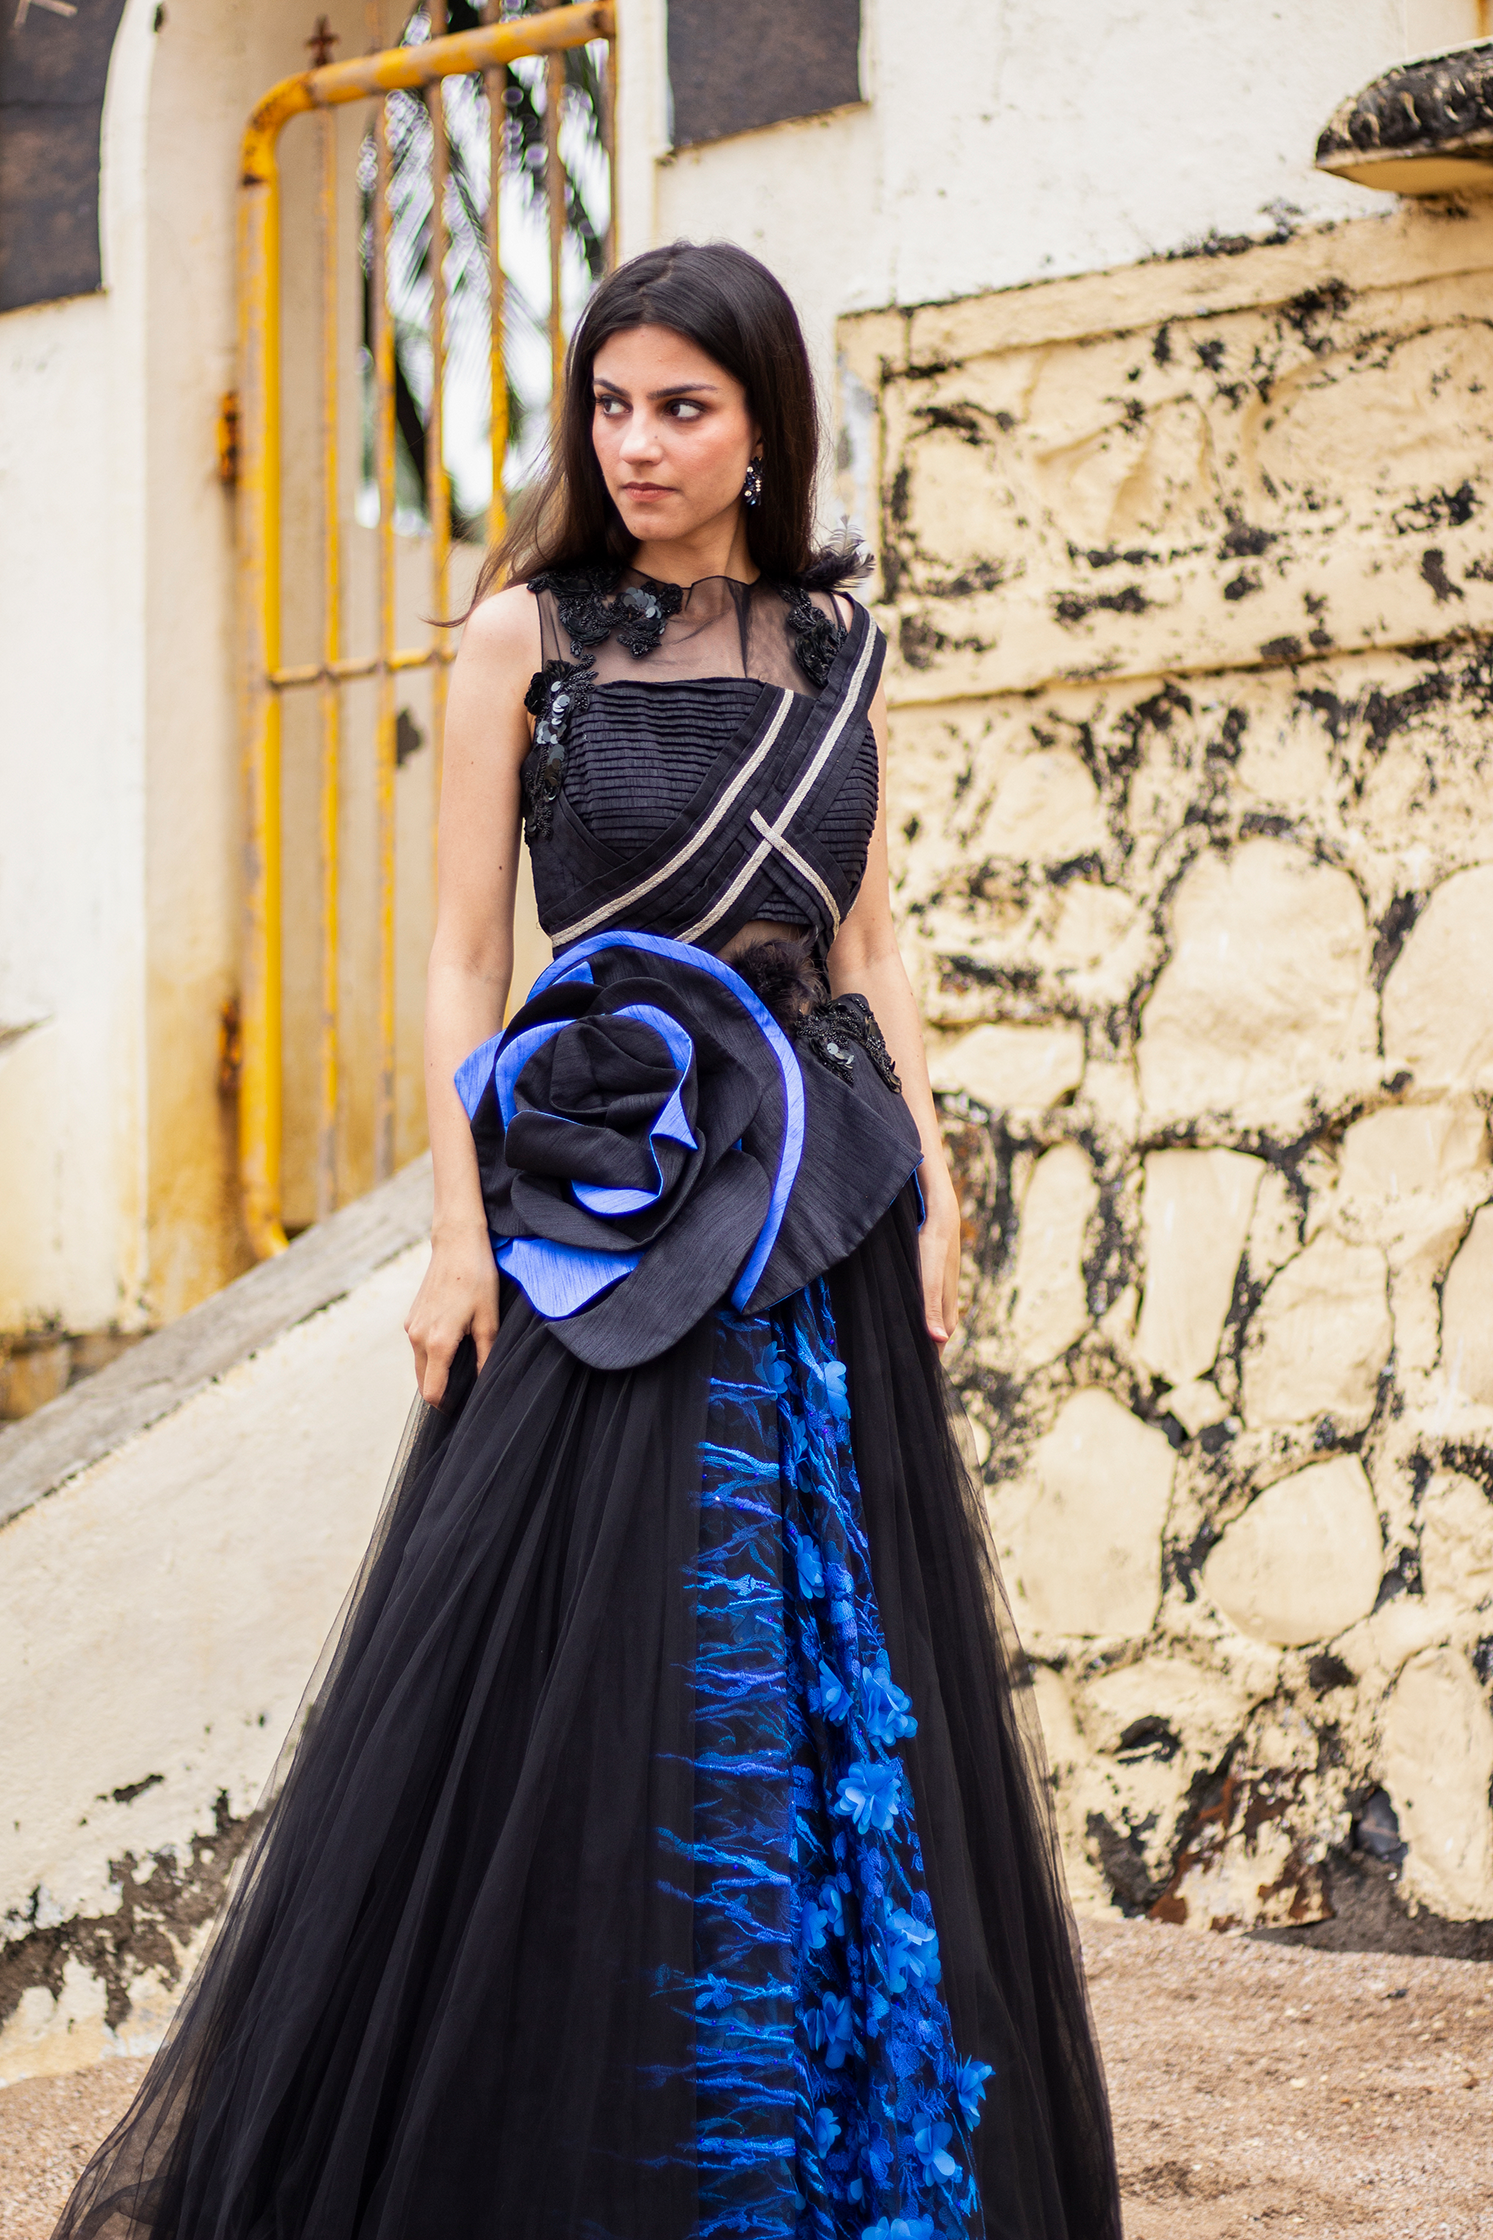 Black Gown With Applique Flowers